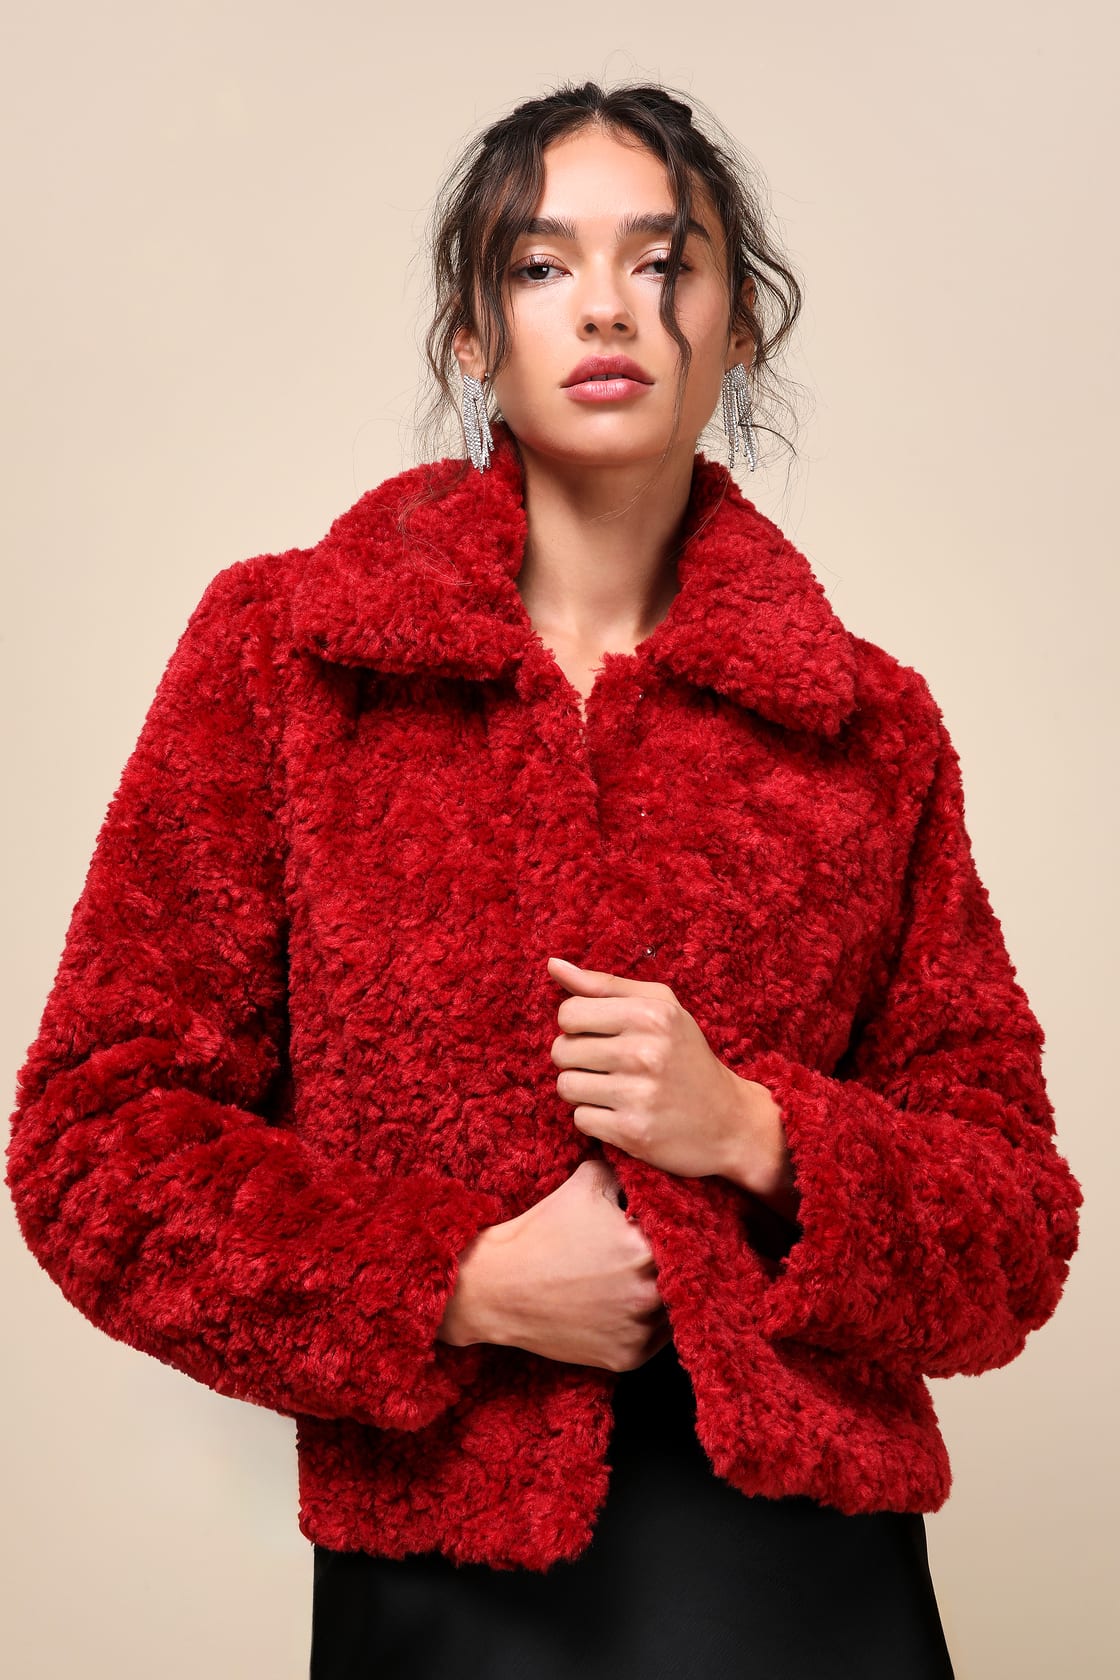 Taylor Swift Red Coat Outfit 2023: Taylor Swift Brittany Mahomes - Betches